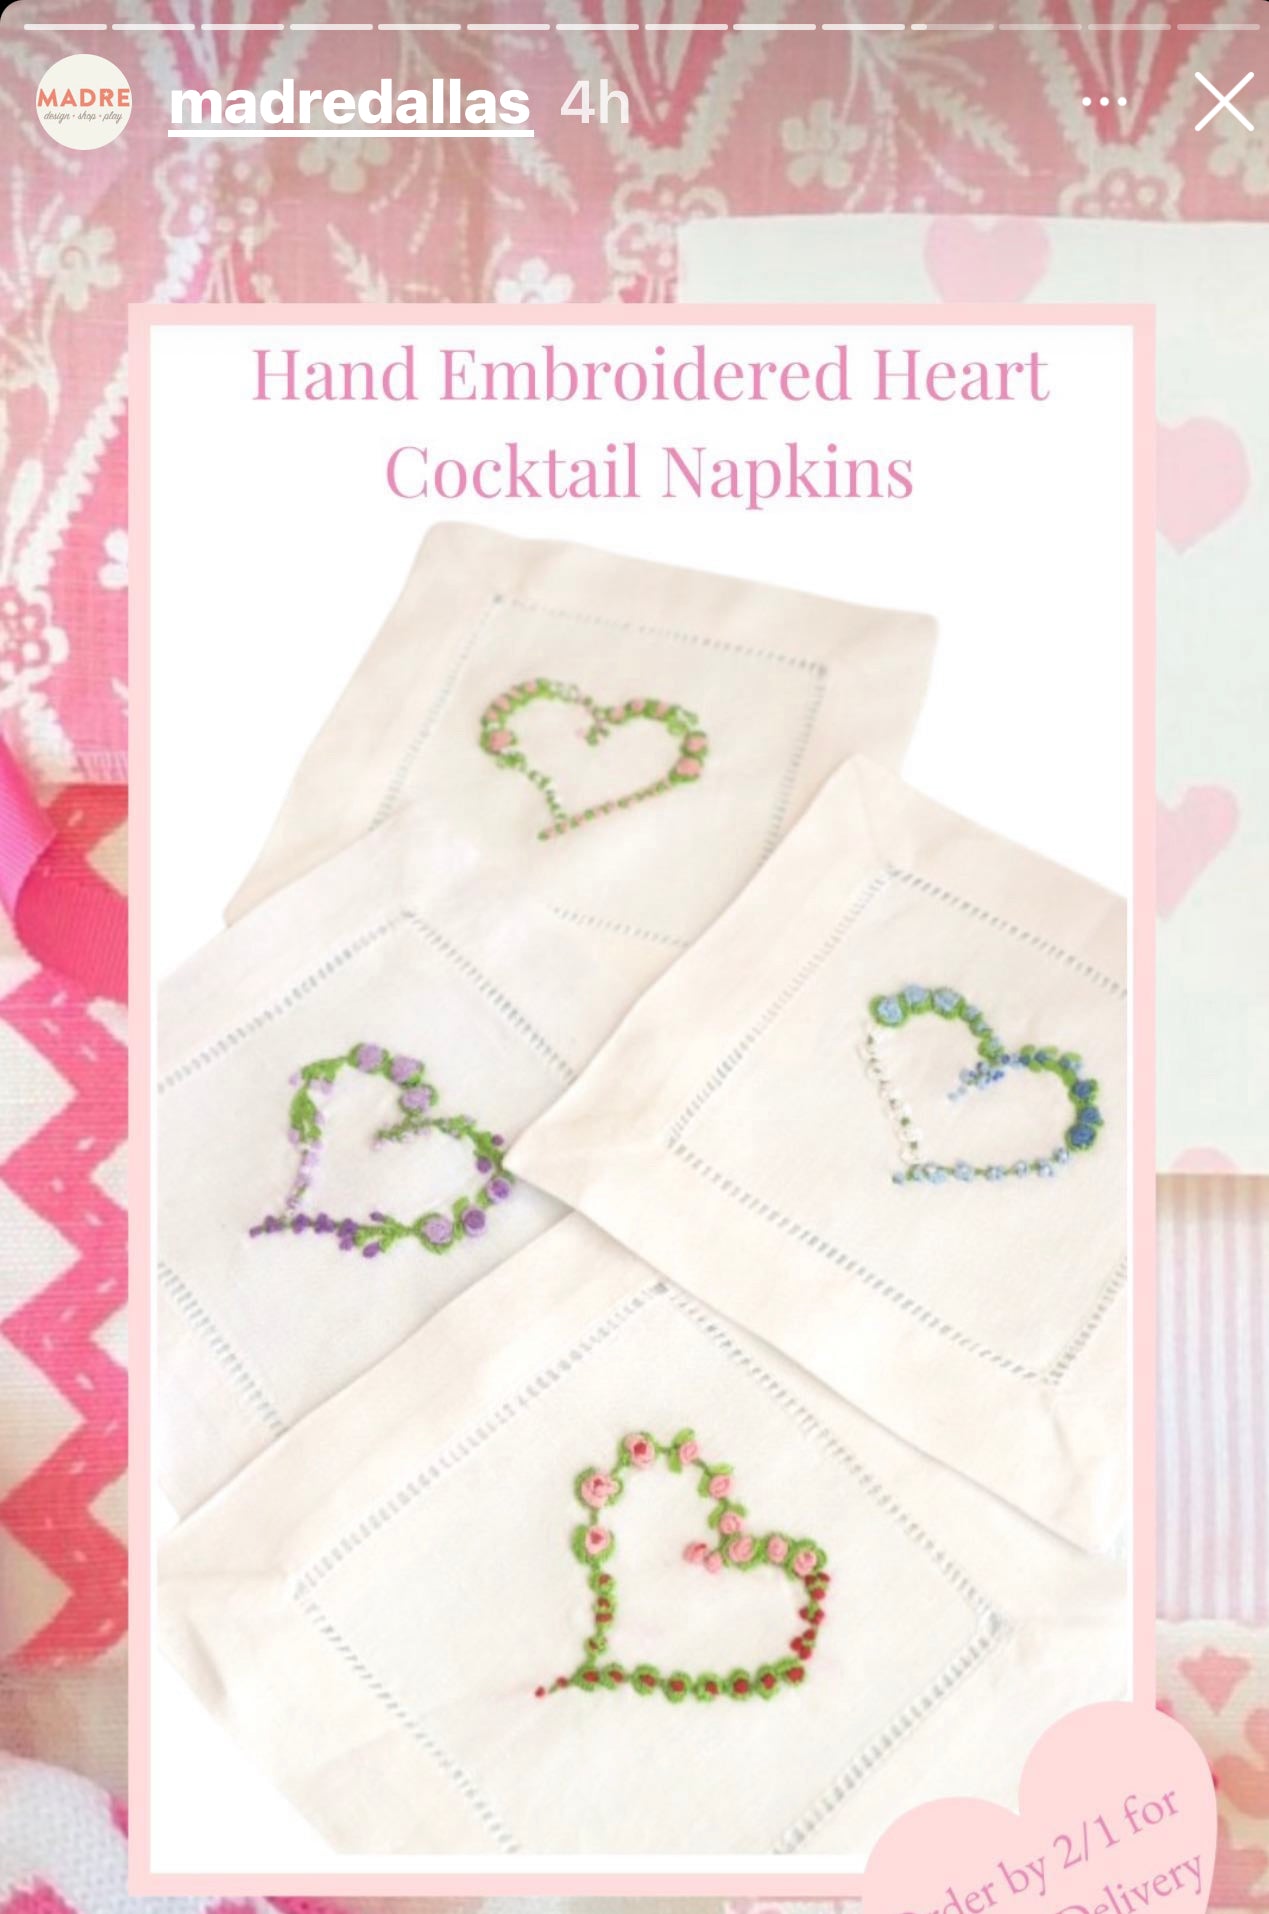 A new set "Hand Embroidered Valentine Cocktail Napkins"